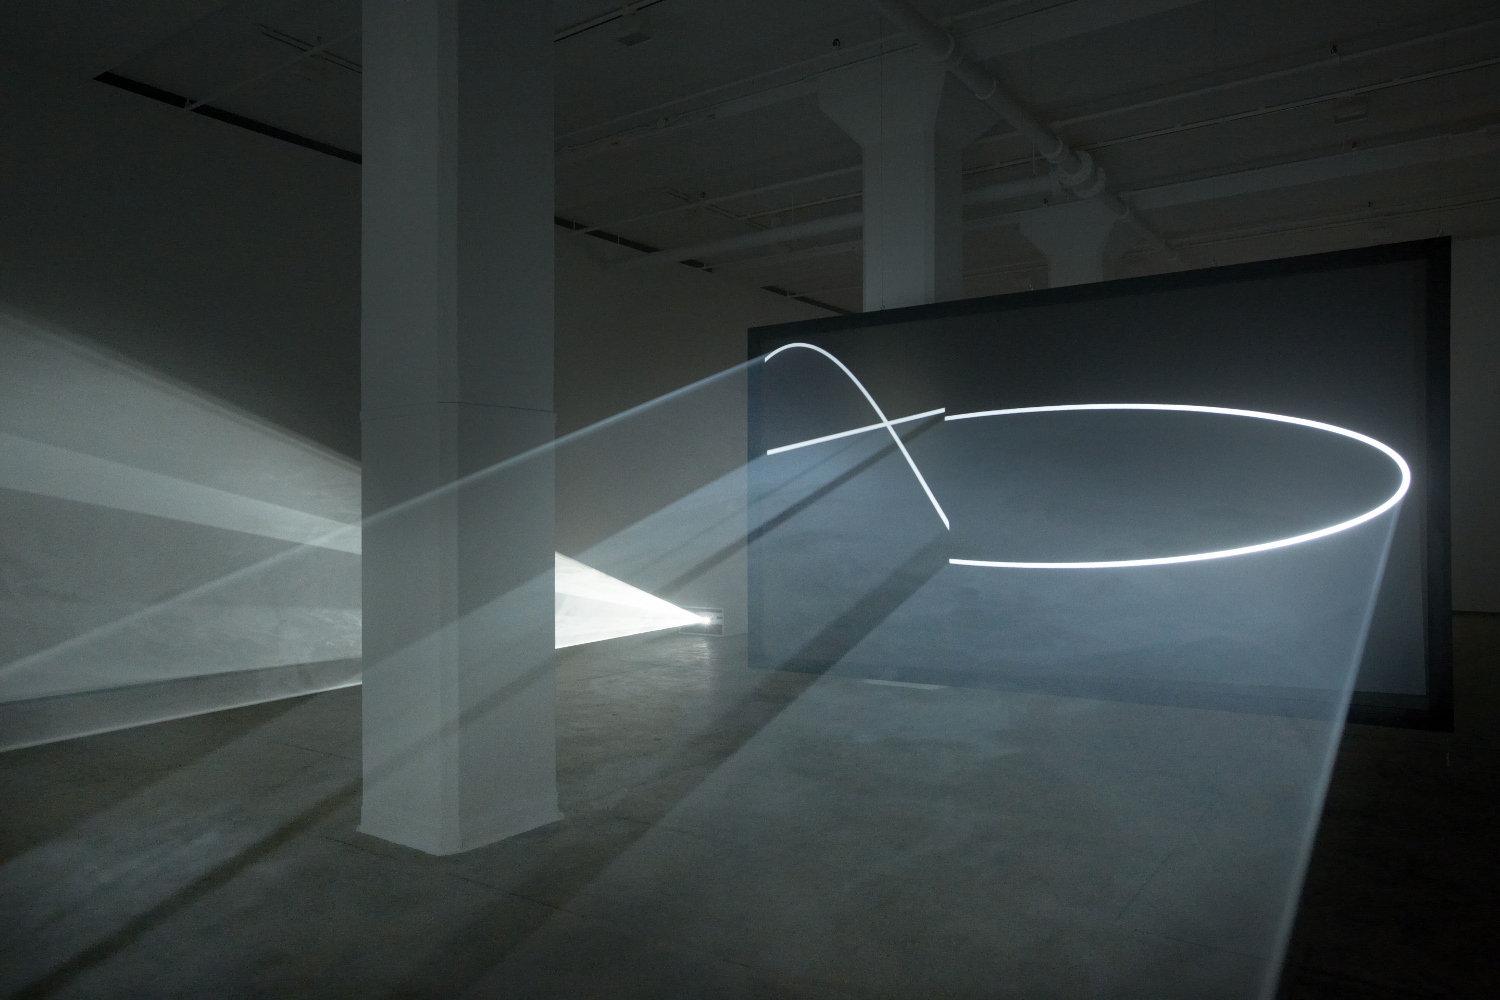  Anthony McCall. “Face to Face” (2013).  Installation view at Sean Kelly Gallery, New York, 2013.  Photograph by Jason Wyche. 